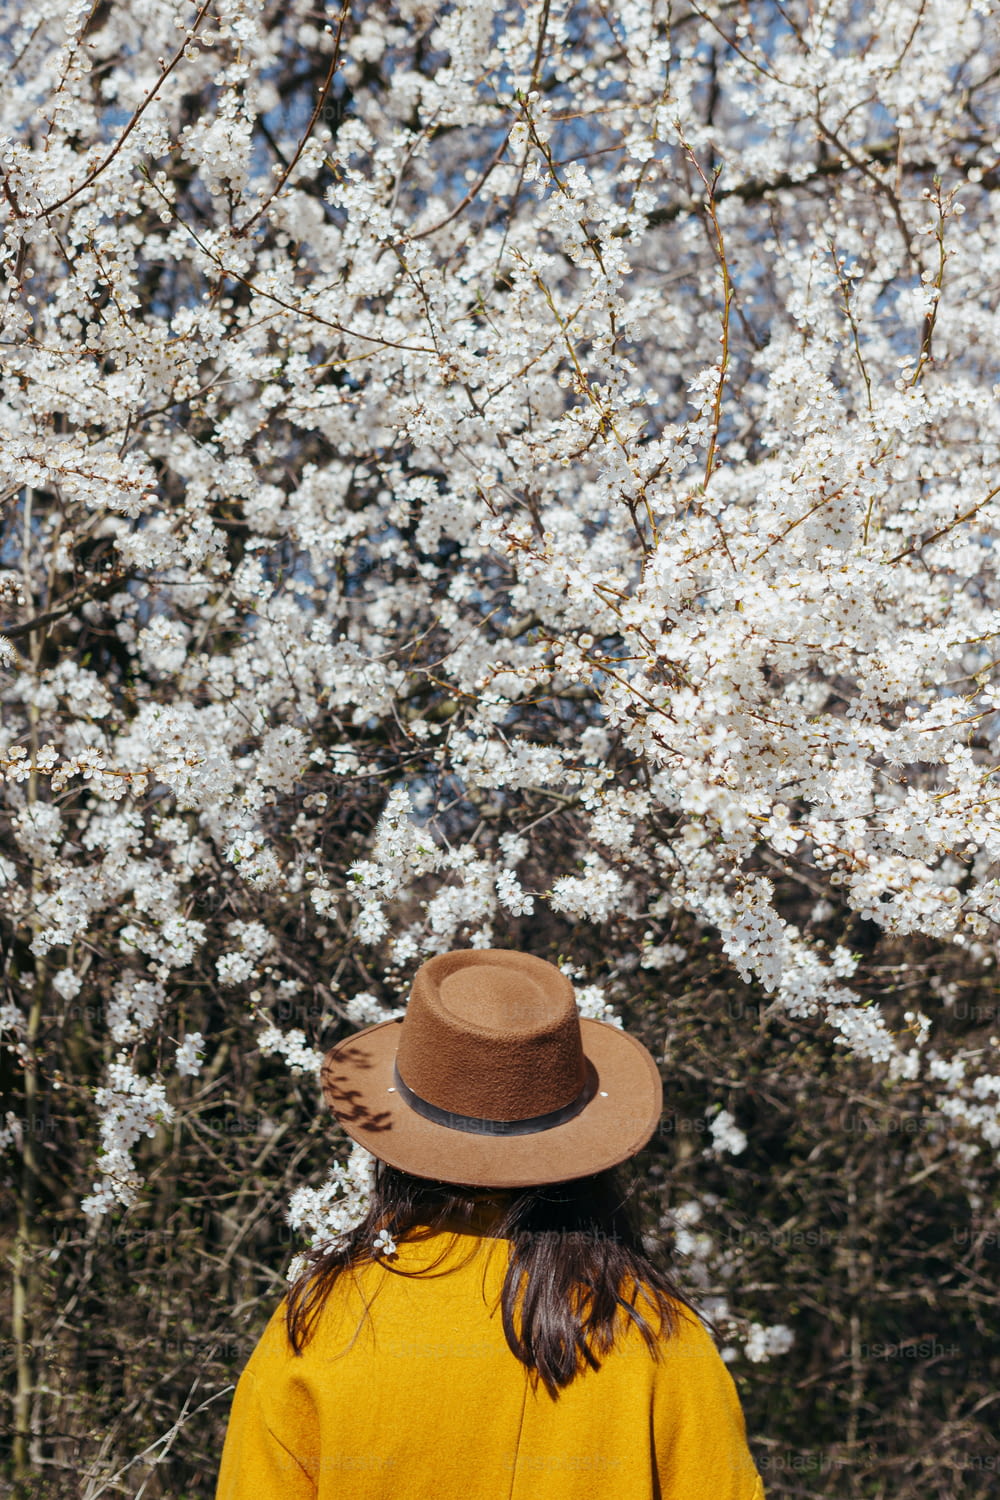 Stylish woman in hat sensually posing among blooming cherry branches in sunny spring day, back view. Calm tranquil moment. Fashionable female in yellow jacket embracing in white flowers